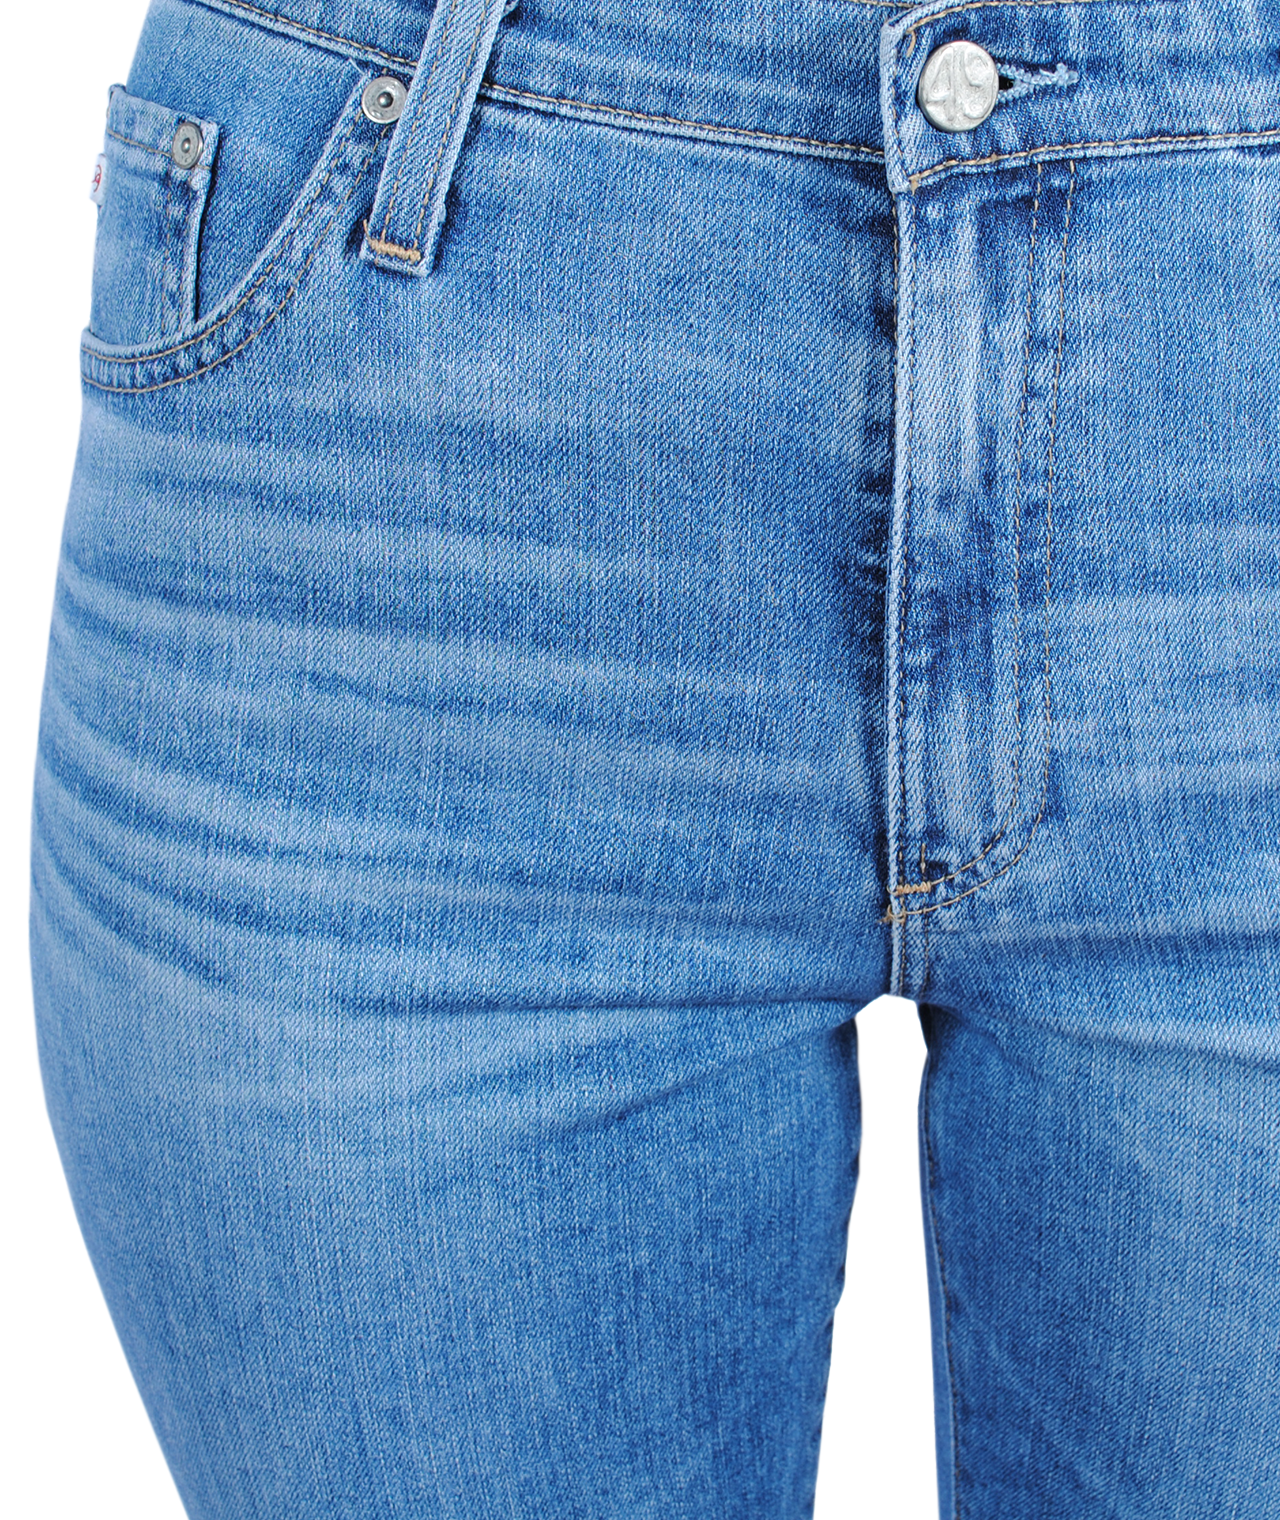 Jeans Isabelle | helldenim